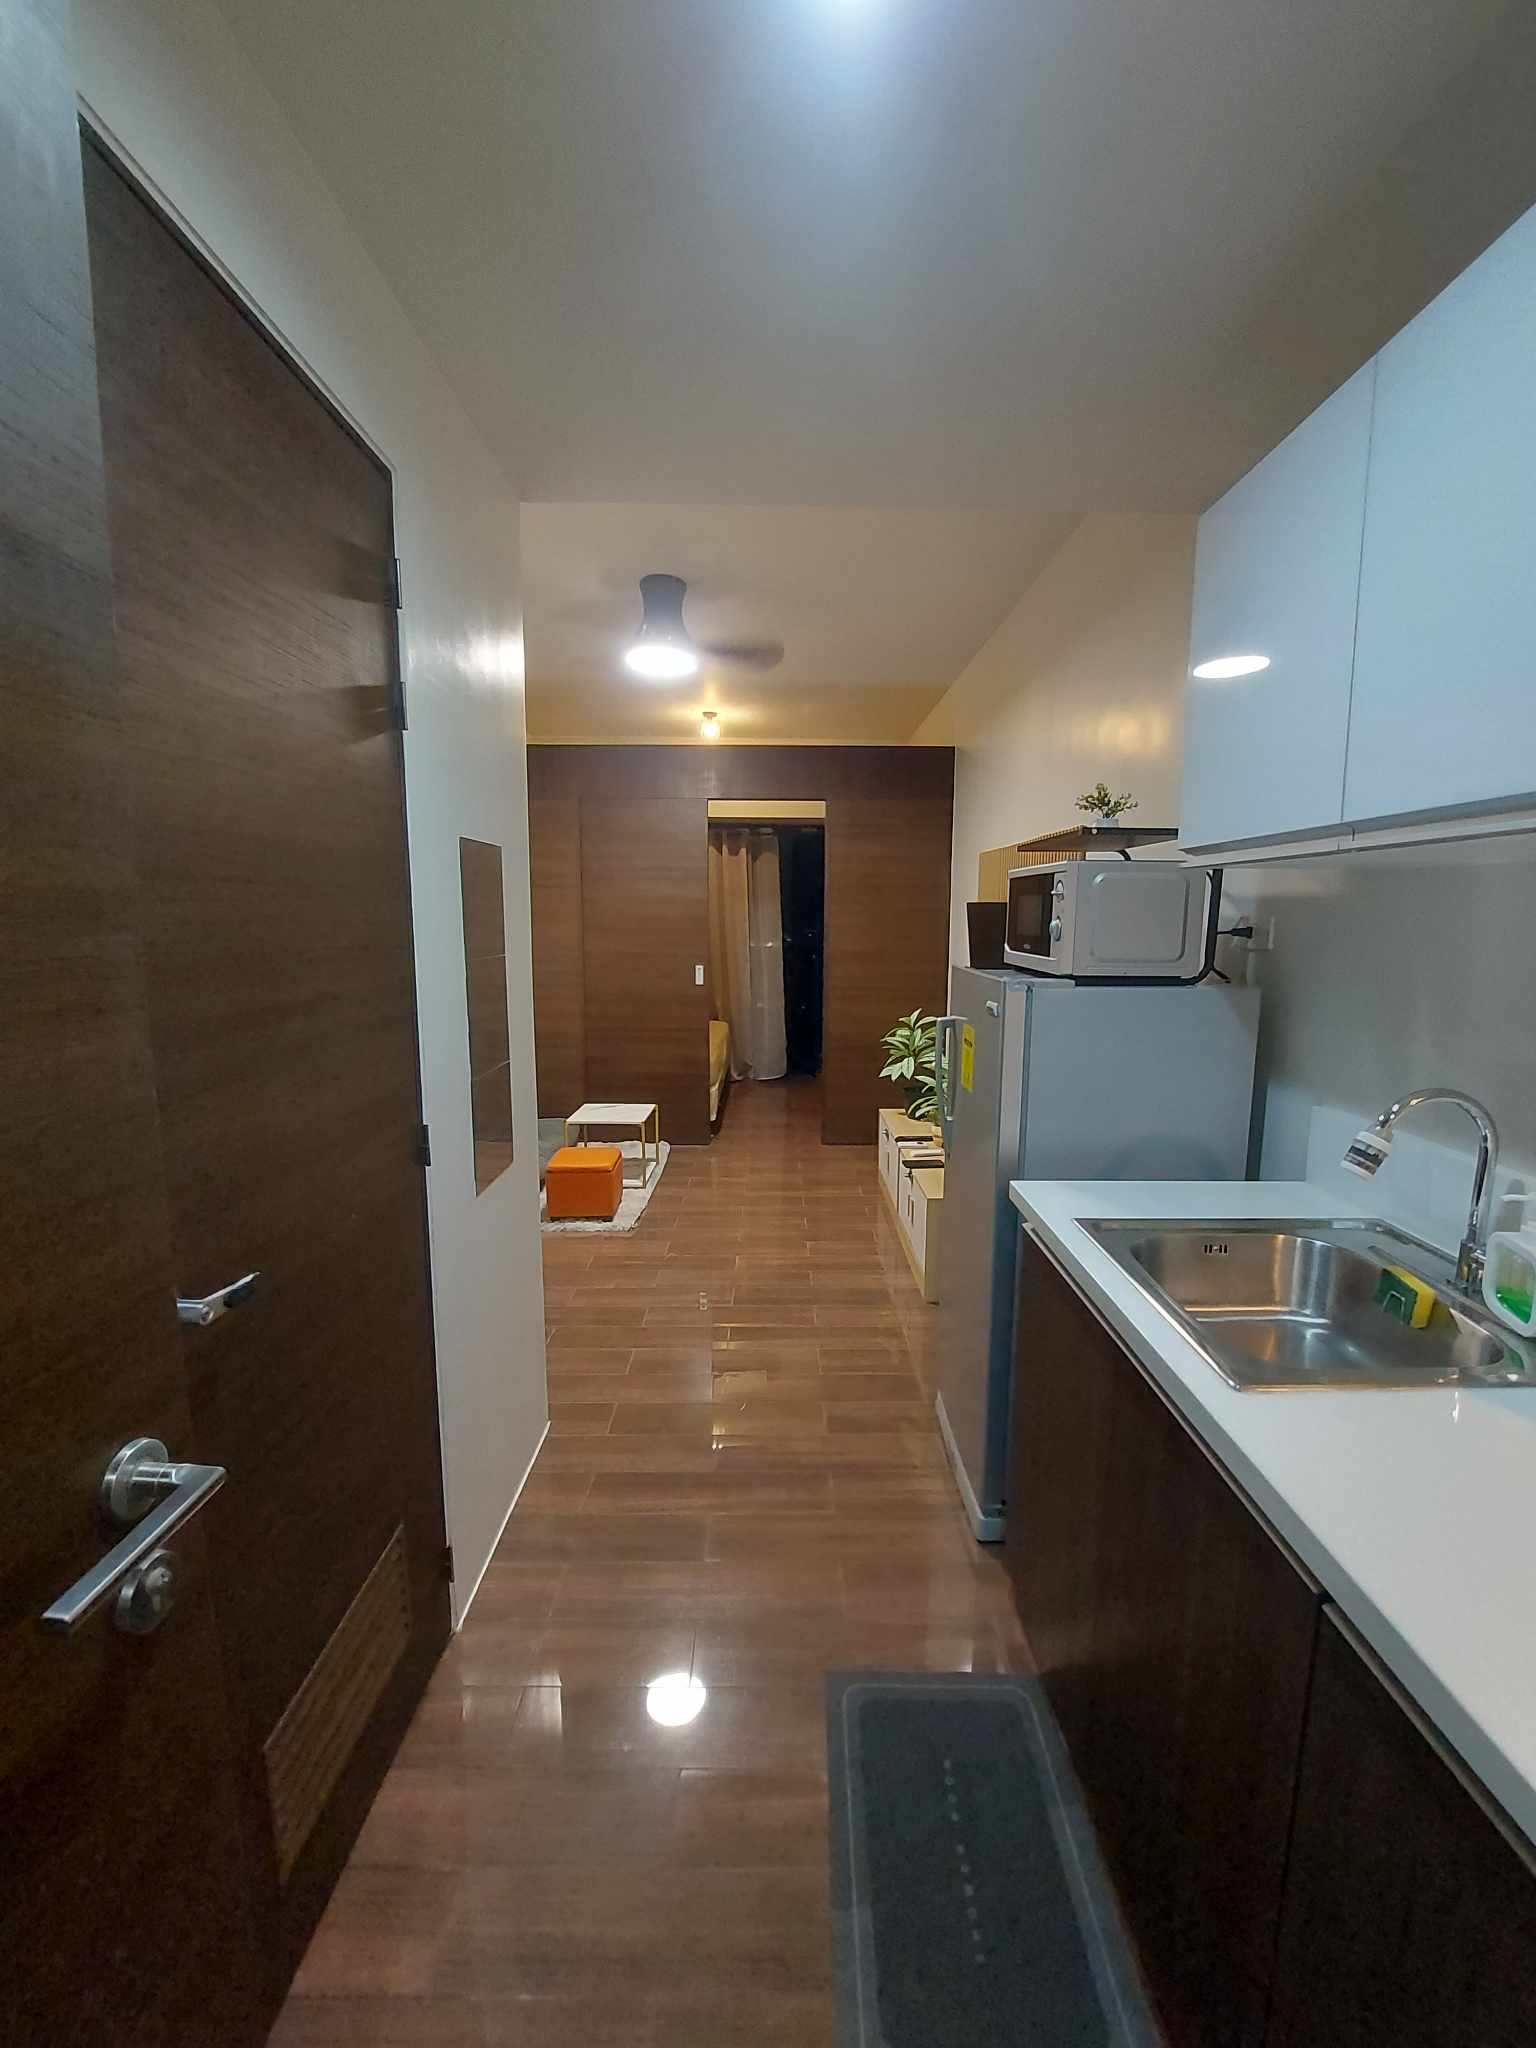 FOR RENT 1BR UNIT AT AIR RESIDENCES MAKATI